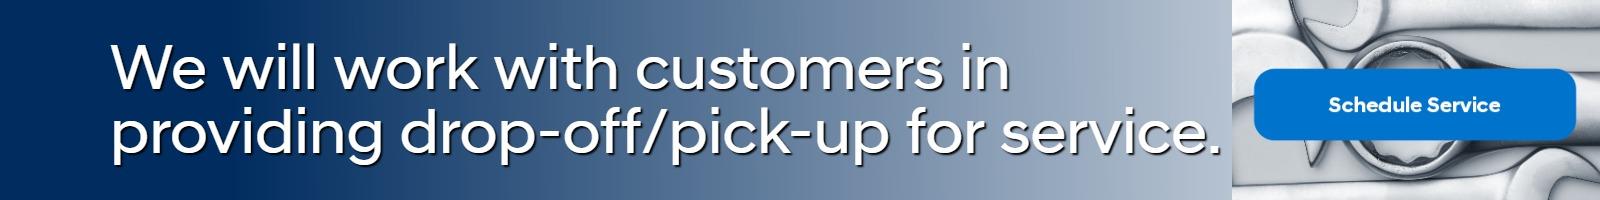 We will work with customers in providing drop-off/pick-up for service.